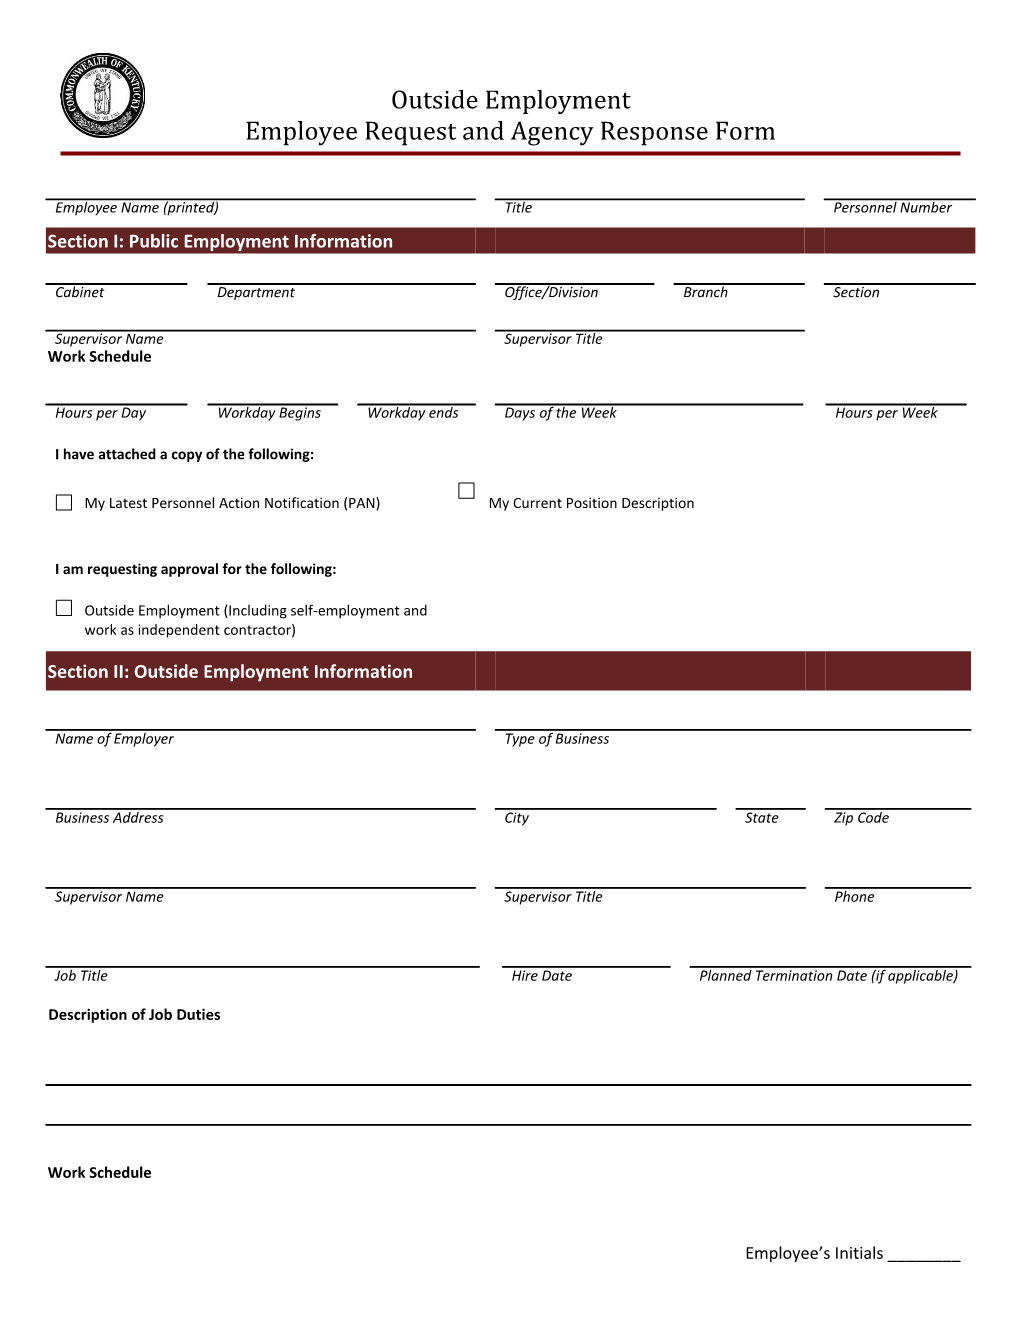 Employee Request and Agency Response Form